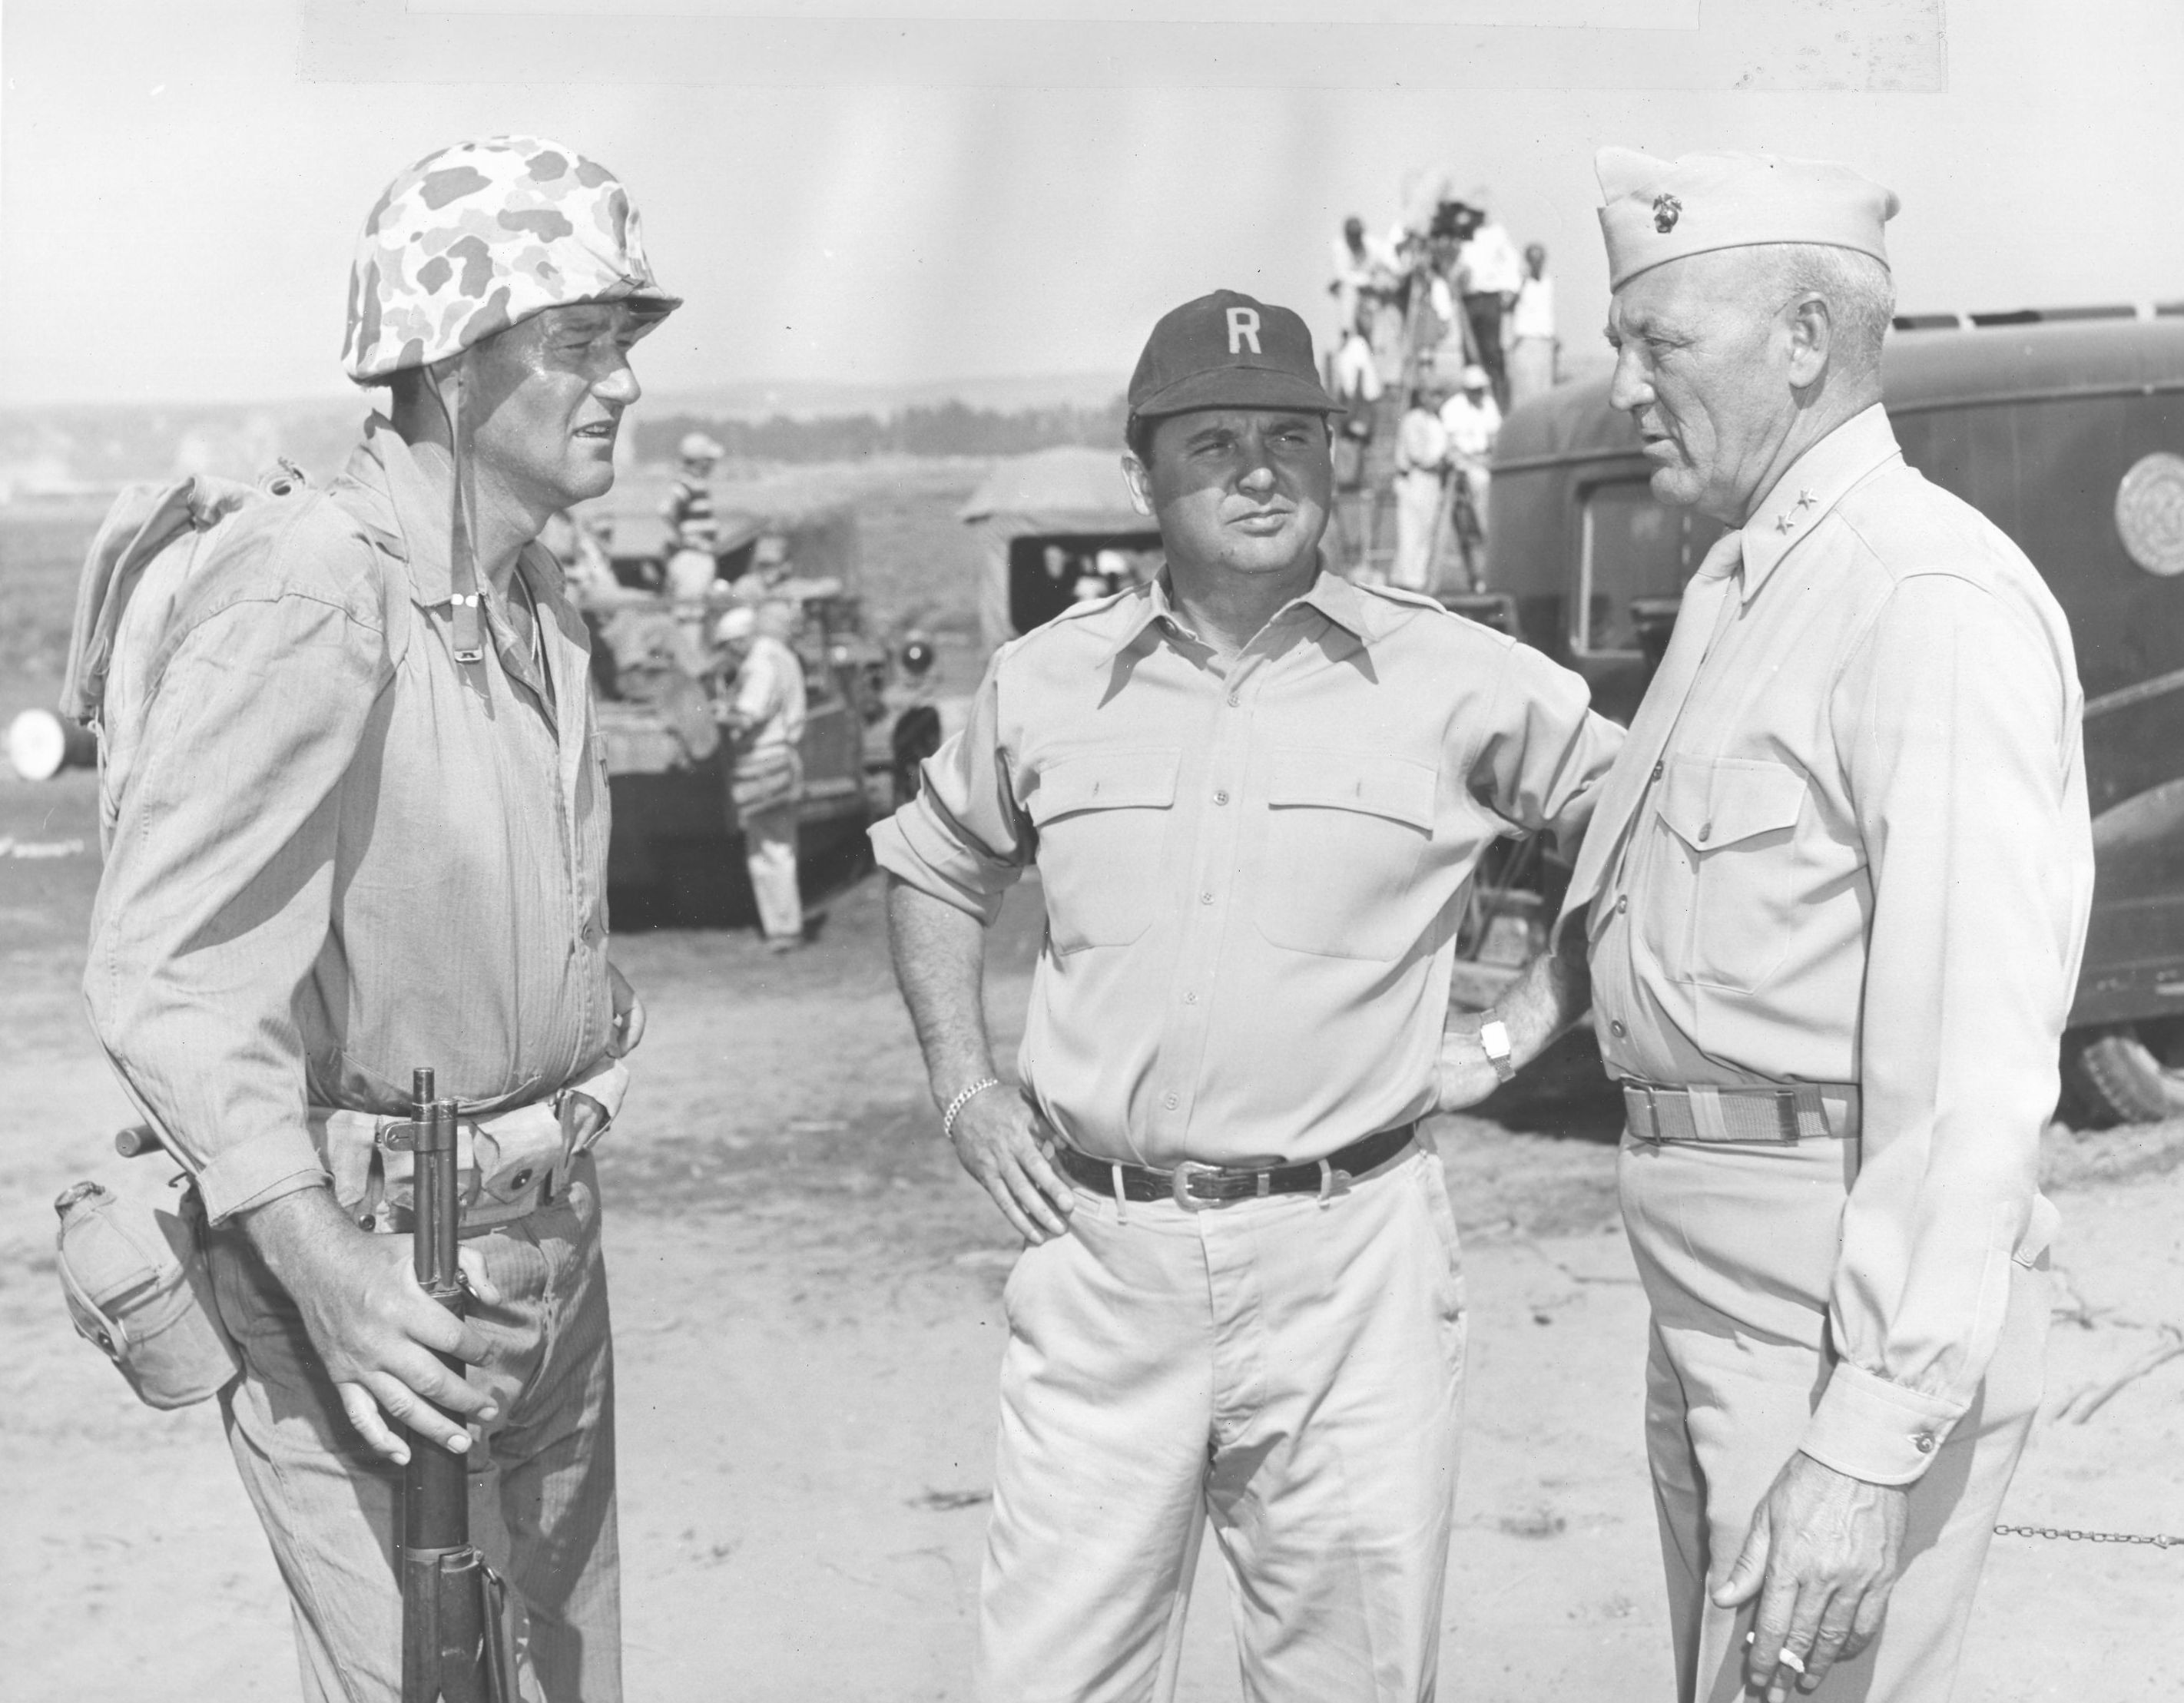 Actor John Wayne and Major General Graves Erskine during the filming of the movie Sands of Iwo Jima, 1 Jan 1949